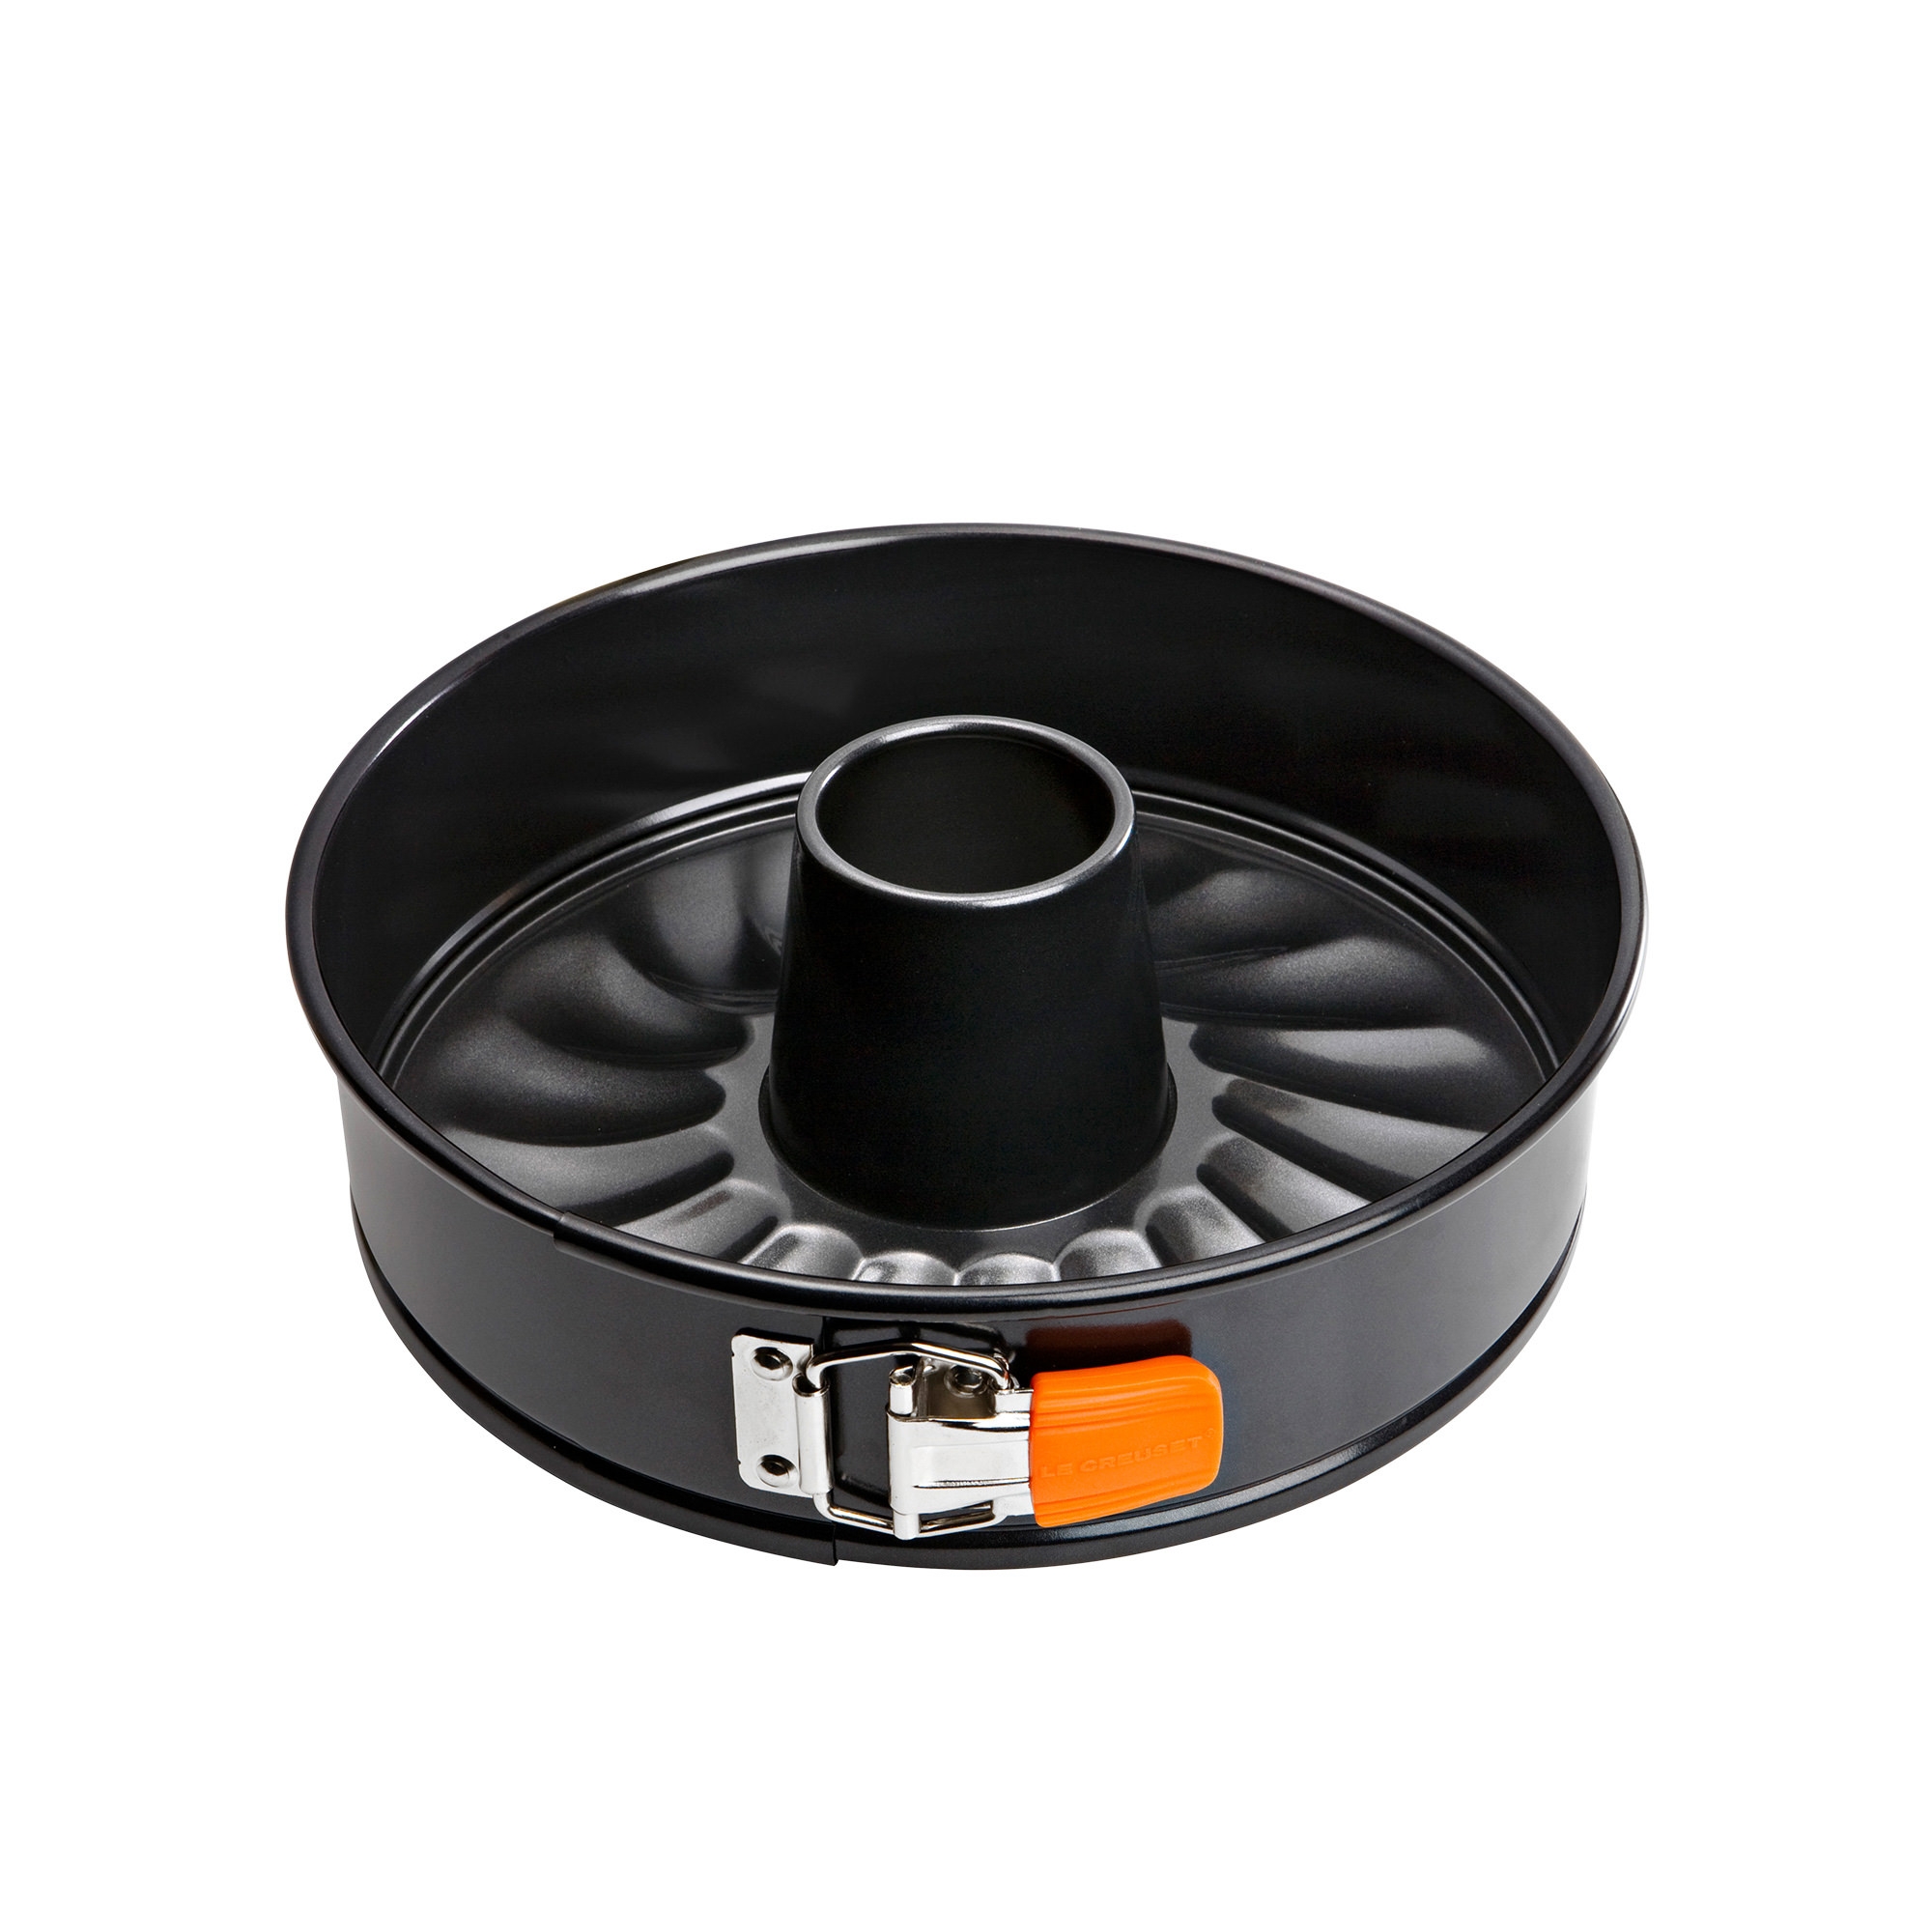 Le Creuset Toughened Non Stick Round Springform Cake Tin with Funnel 25.6cm Image 1